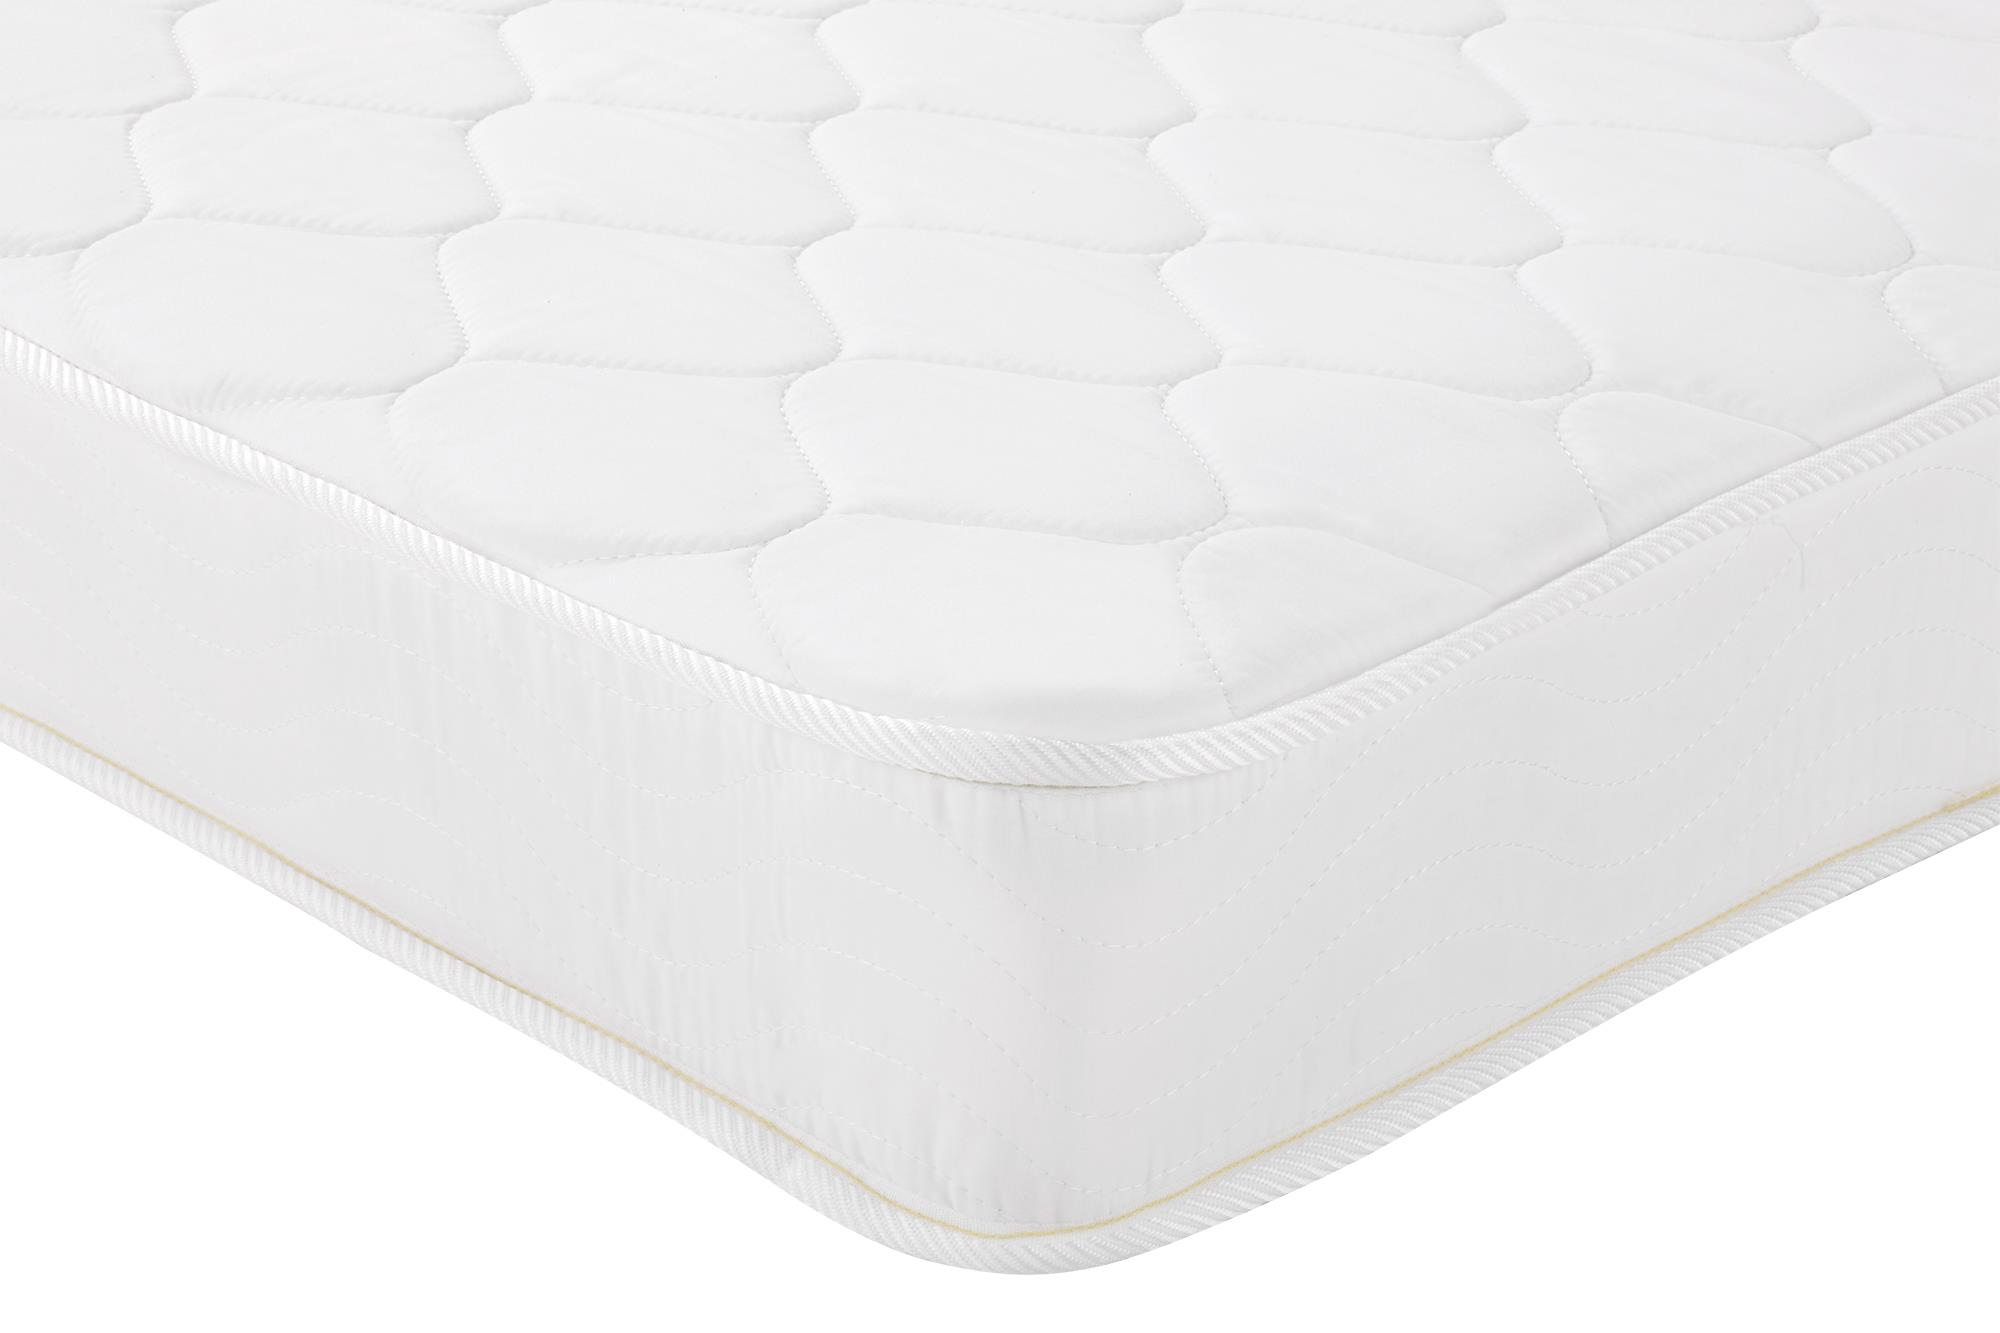 Mainstays 6" Innerspring Coil Mattress, Twin - image 4 of 16